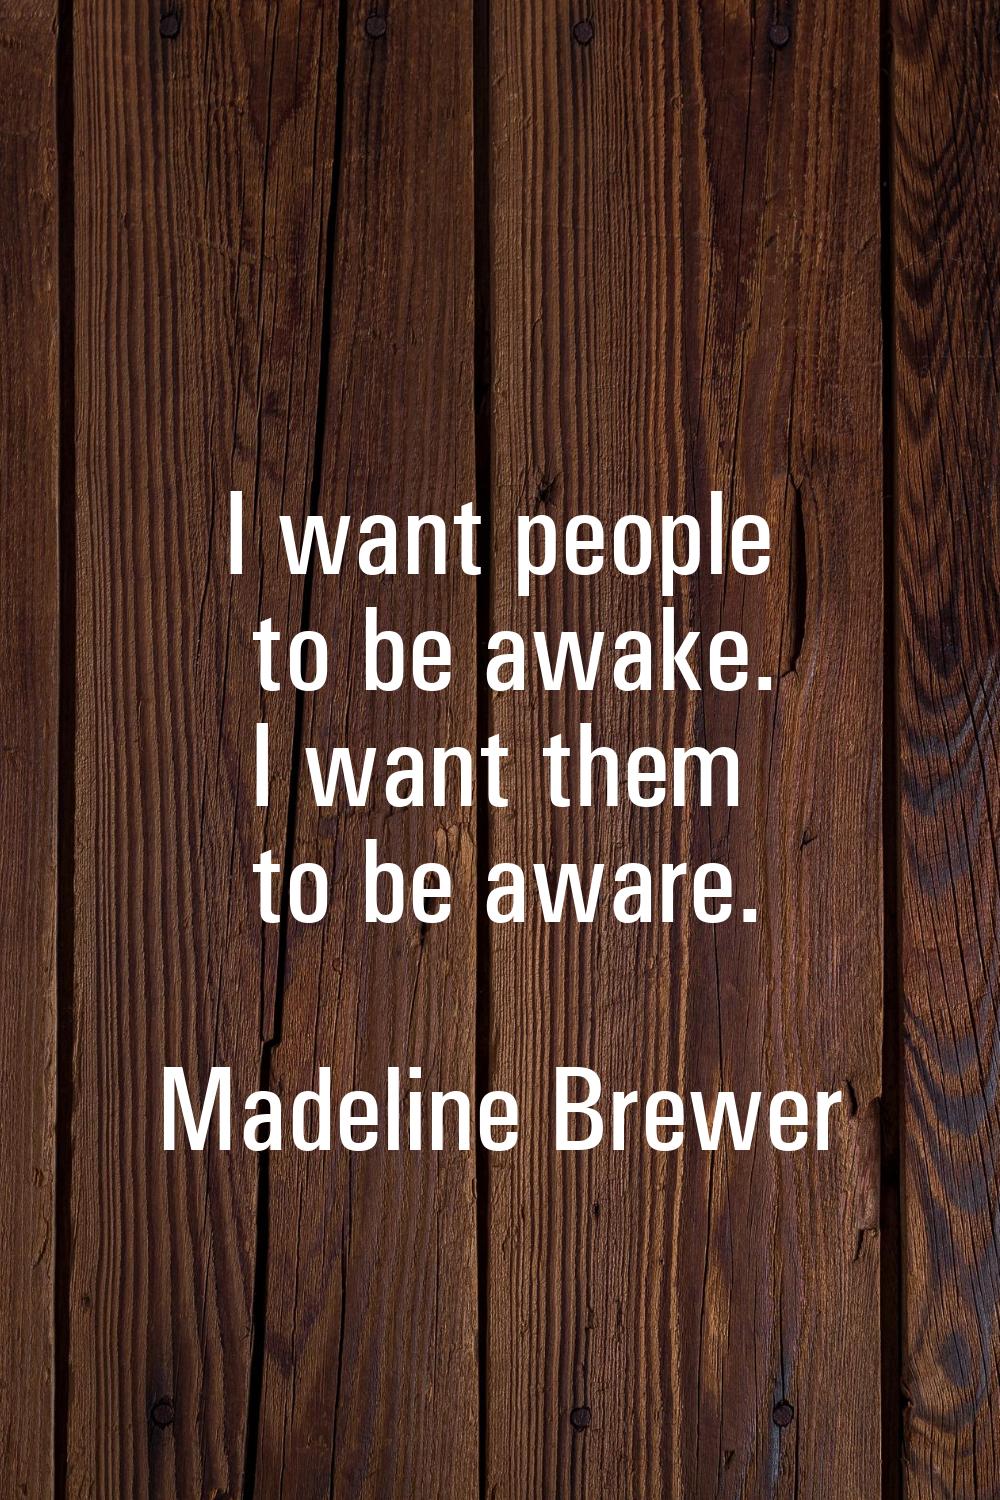 I want people to be awake. I want them to be aware.